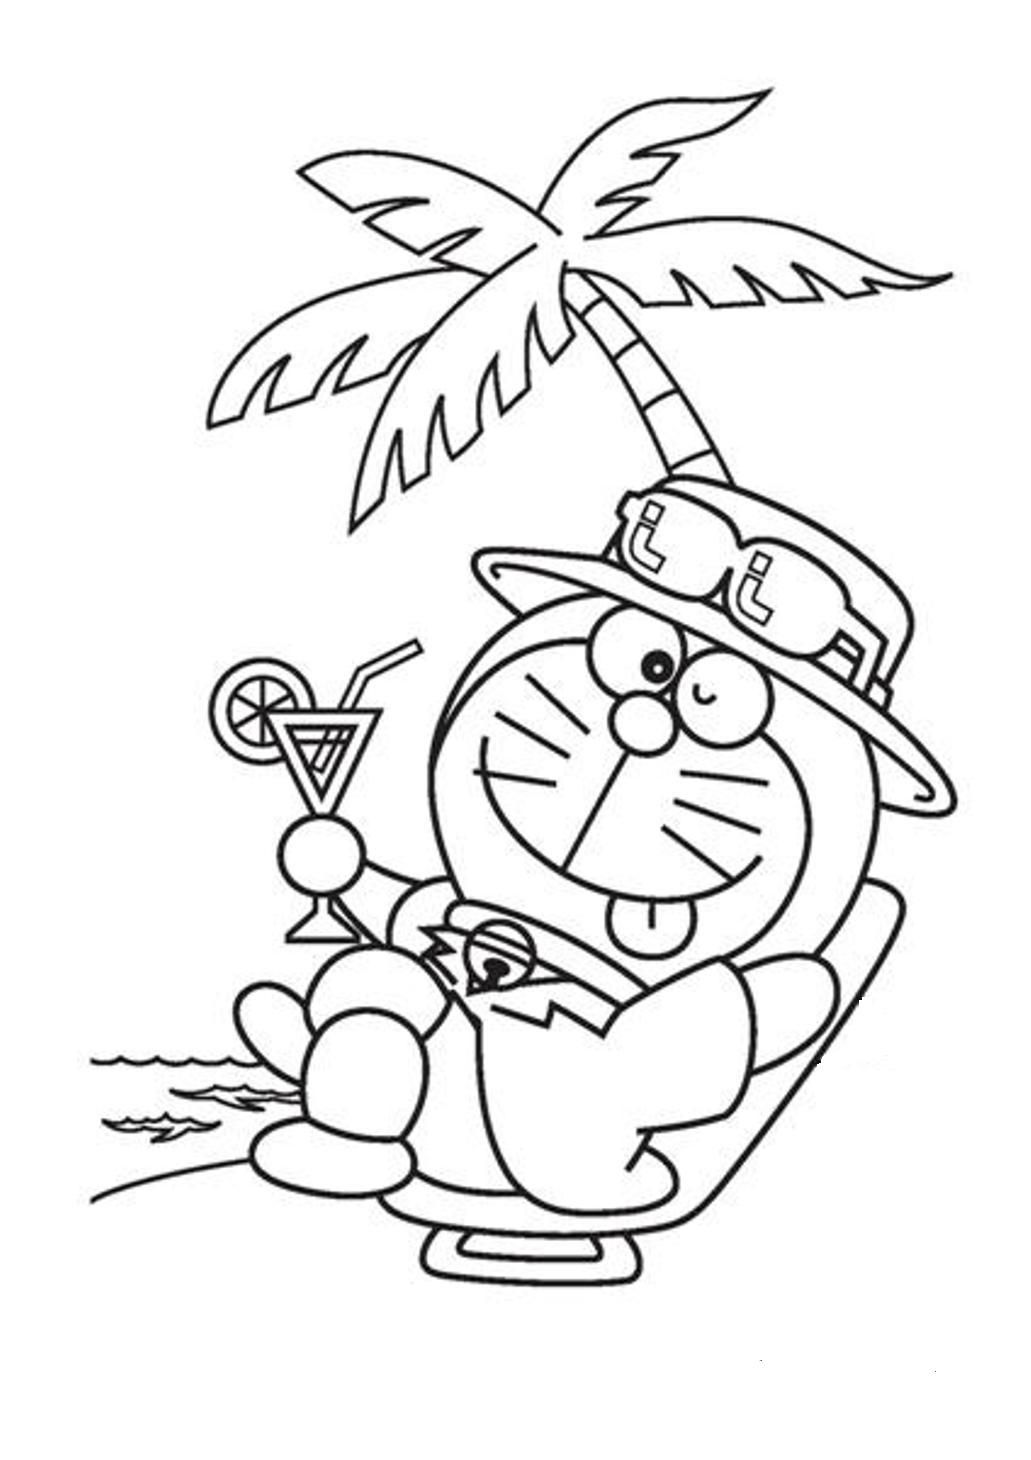 Doraemon At The Beach Coloring Page